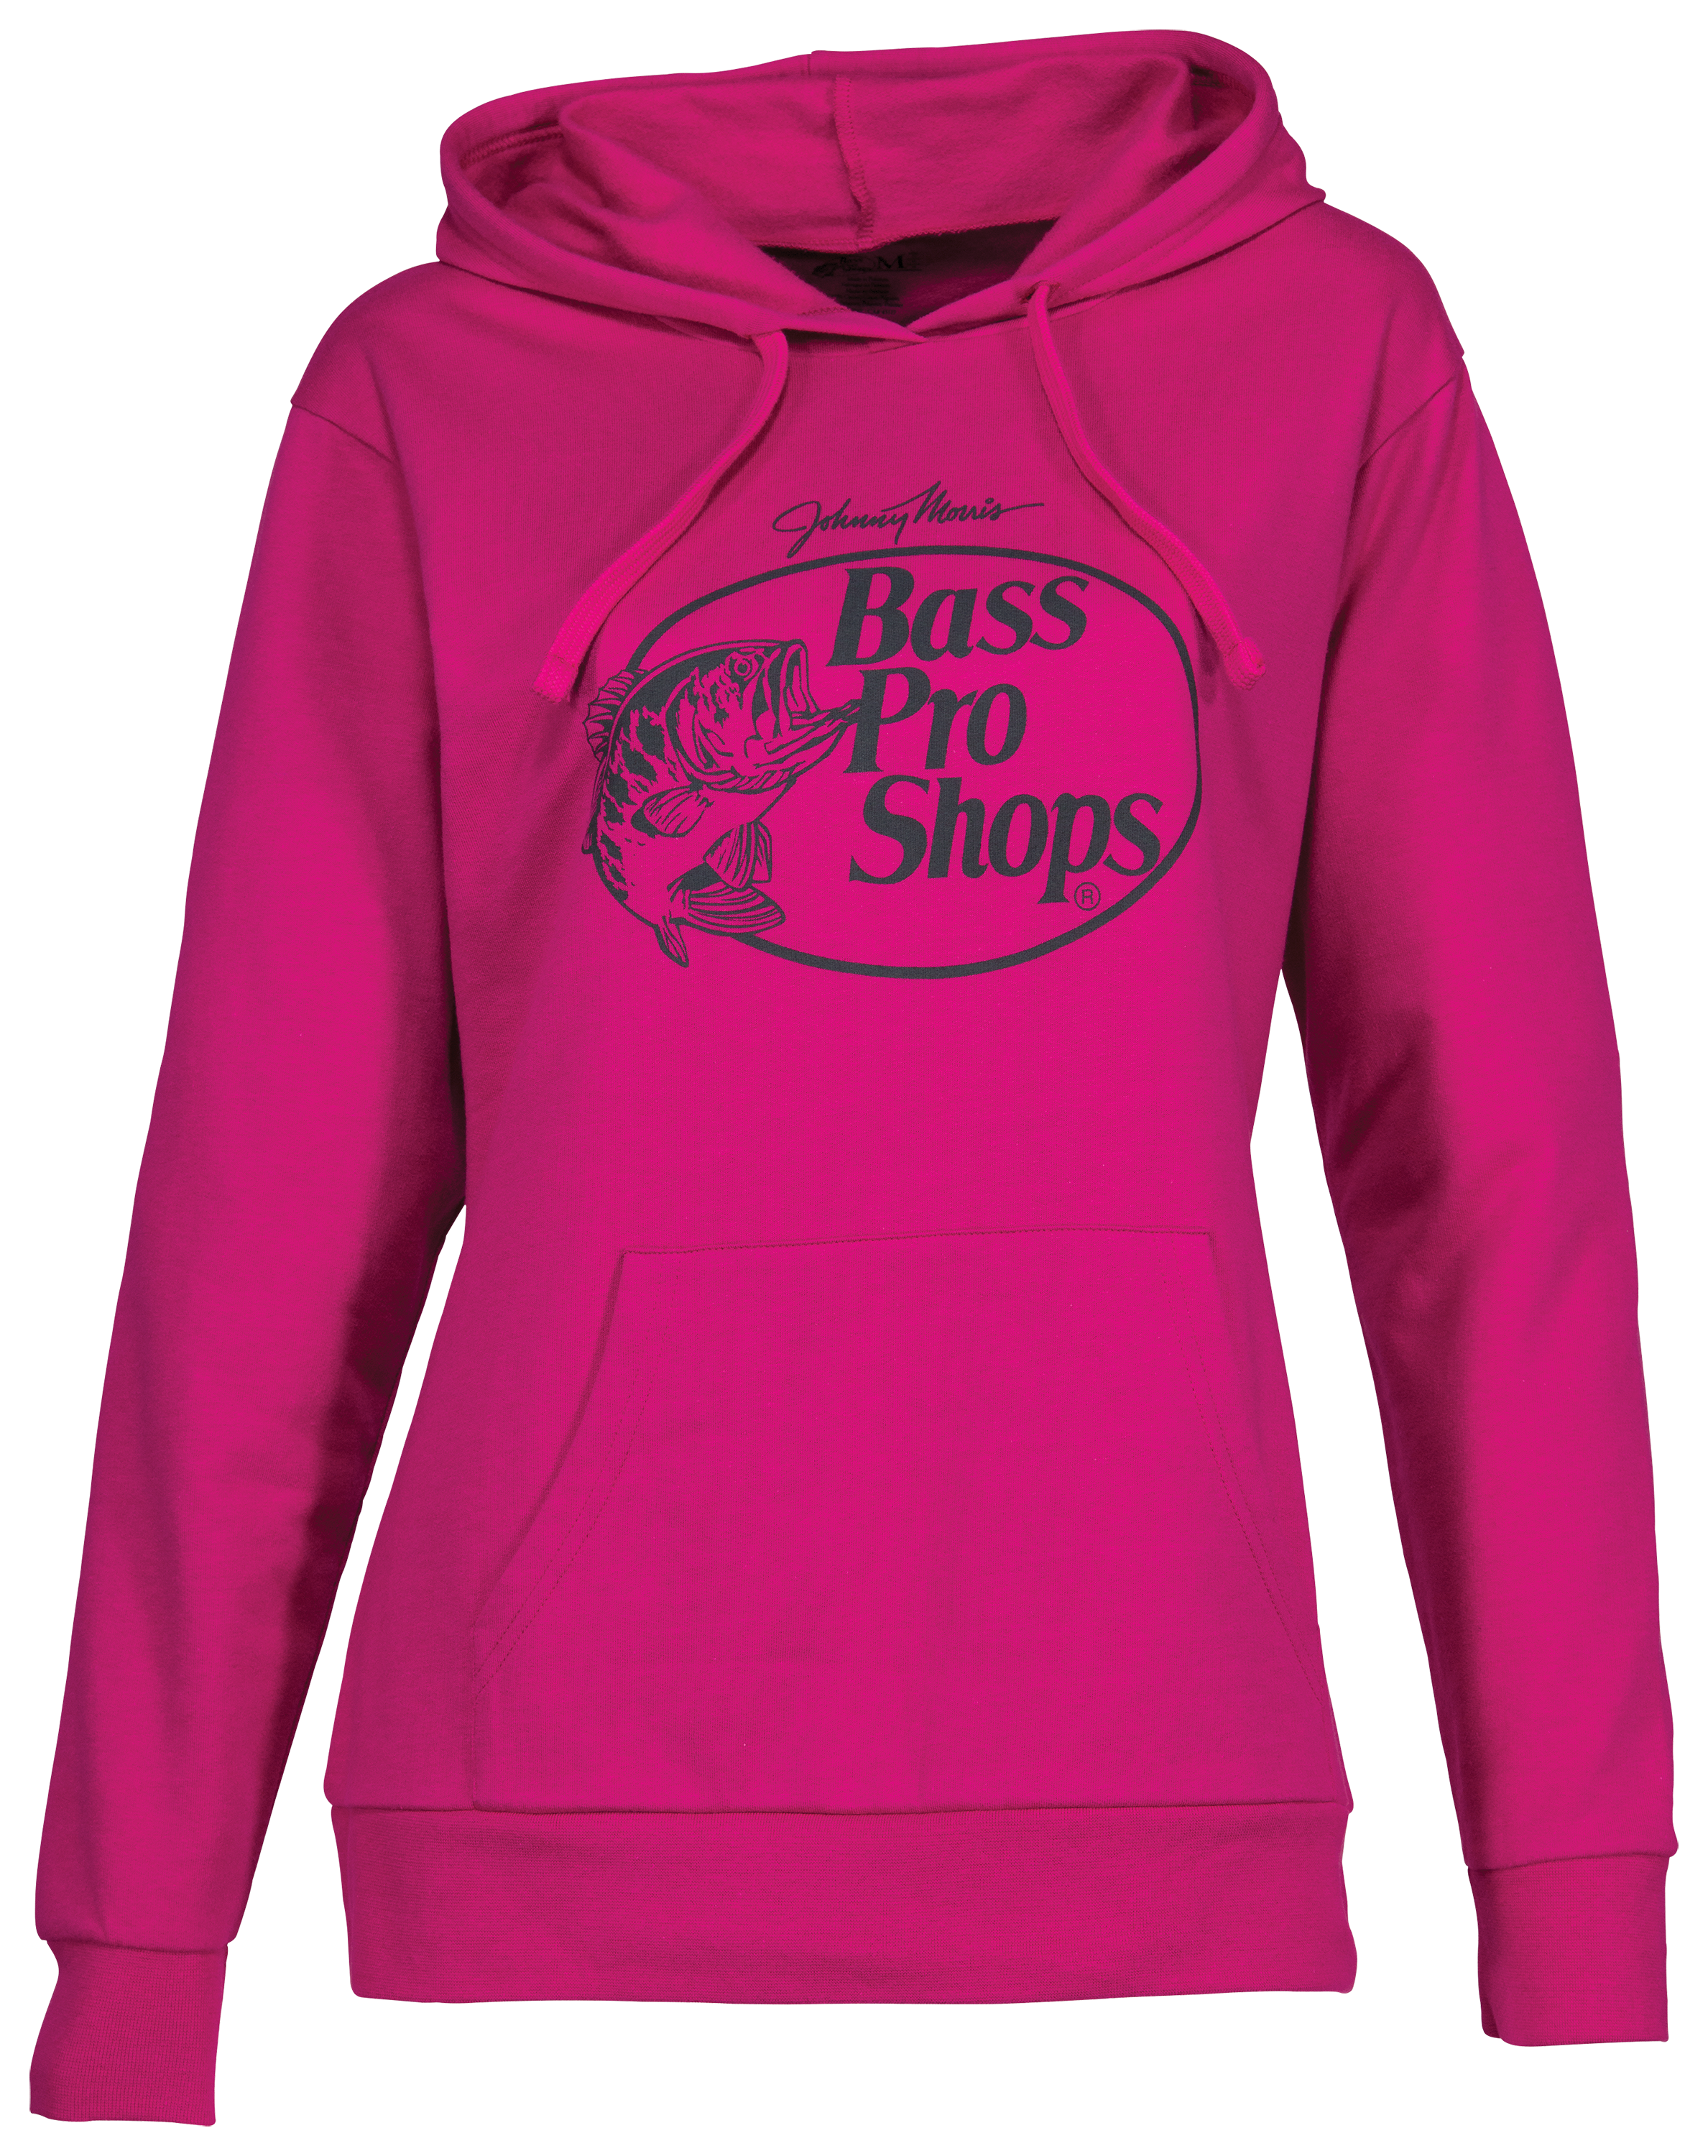 Bass Pro Shops $10 Hoodie for Ladies